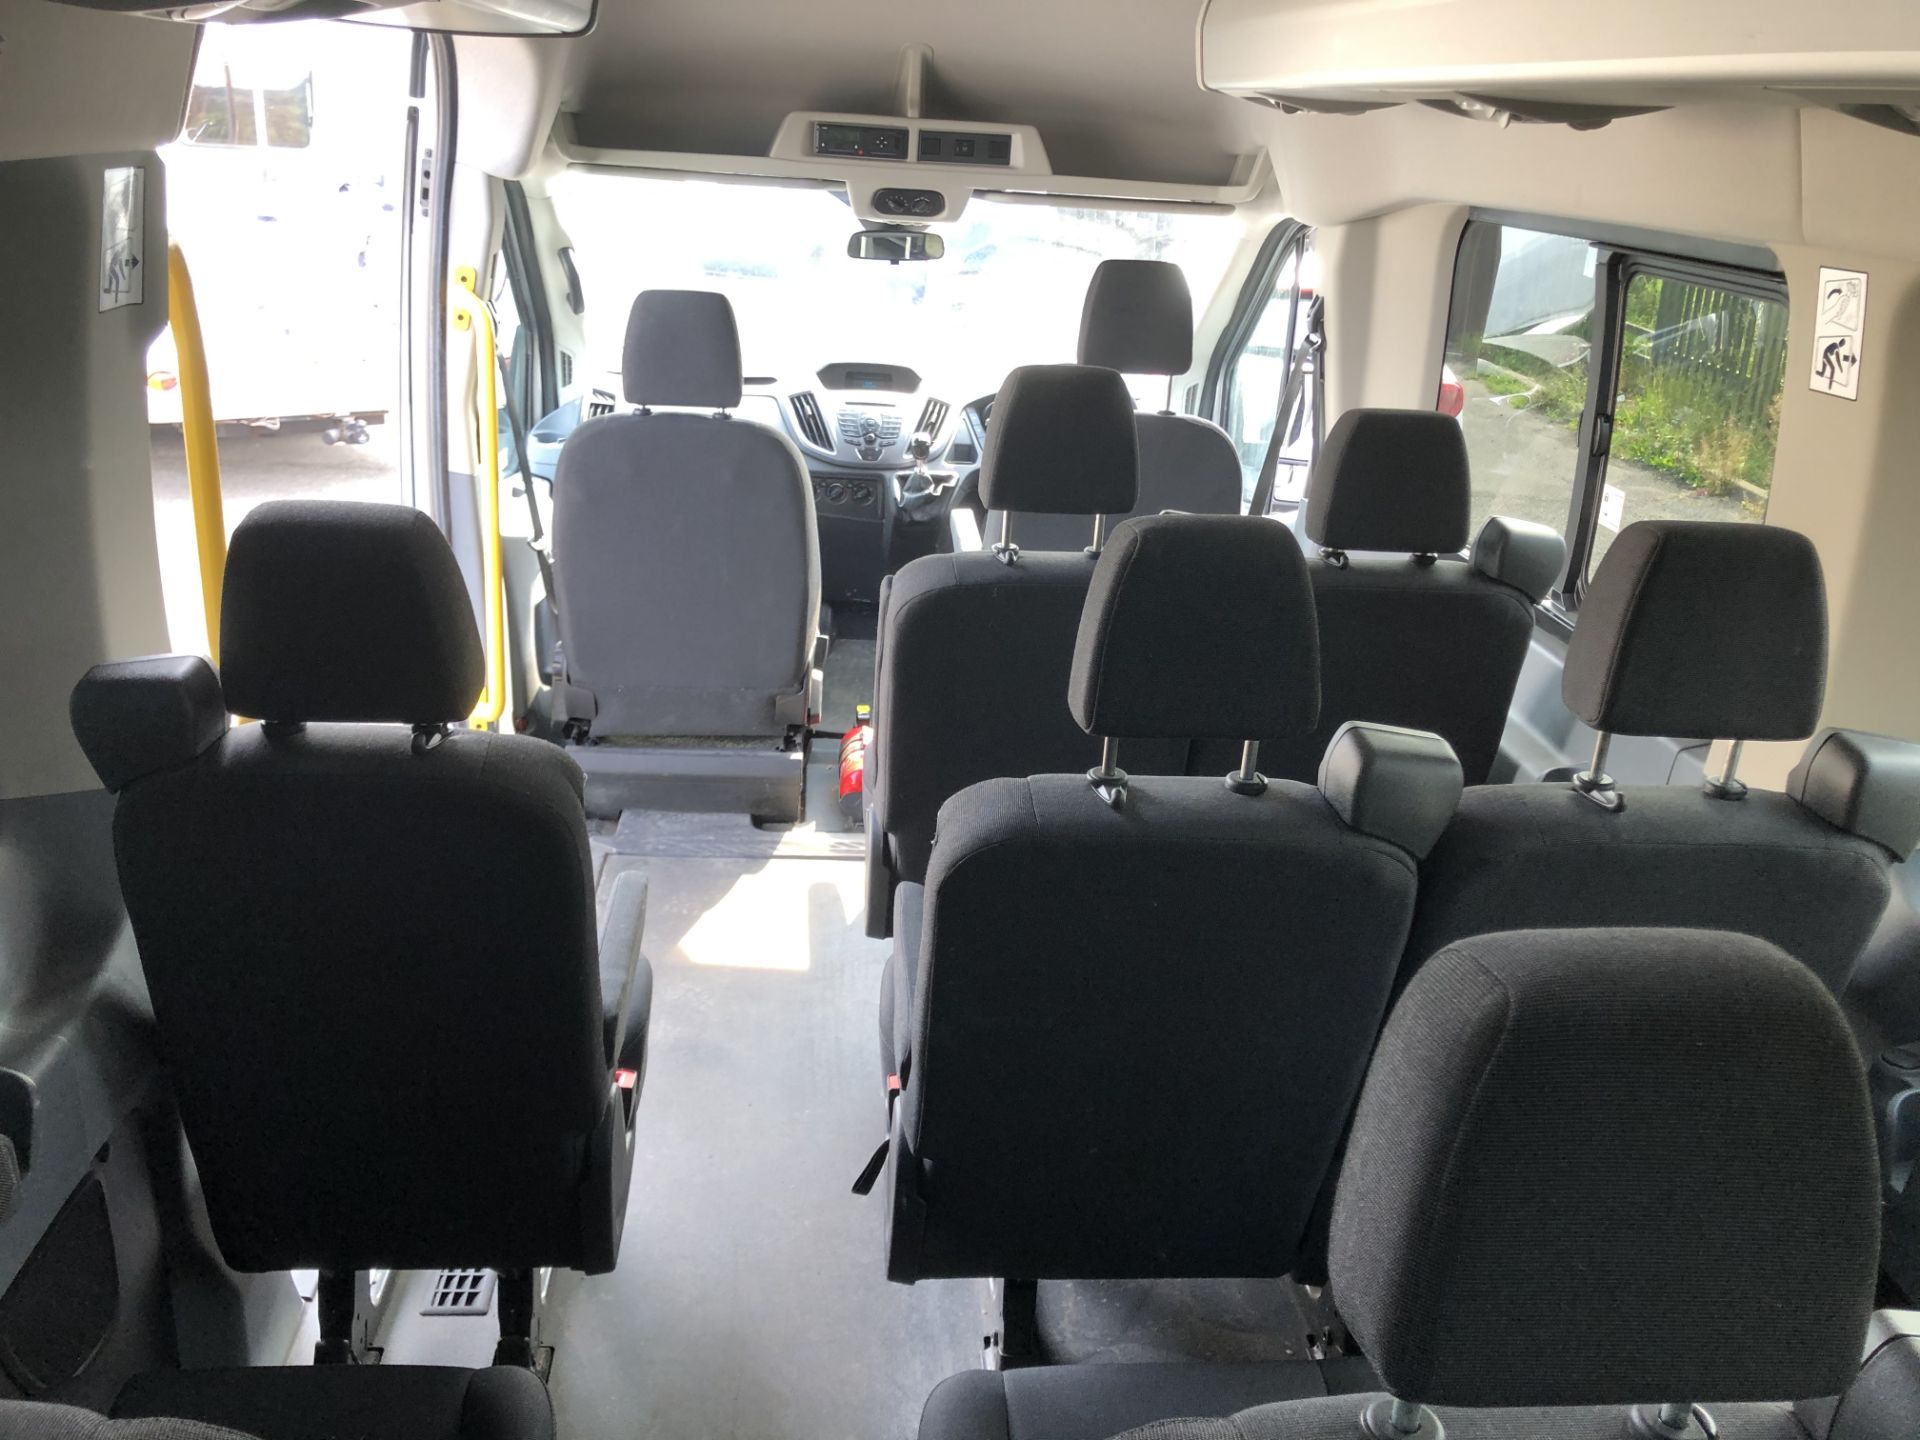 2017/17 REG FORD TRANSIT 460 TREND ECONETIC 2.2 DIESEL 17 SEAT MINIBUS, SHOWING 0 FORMER KEEPERS - Image 10 of 12